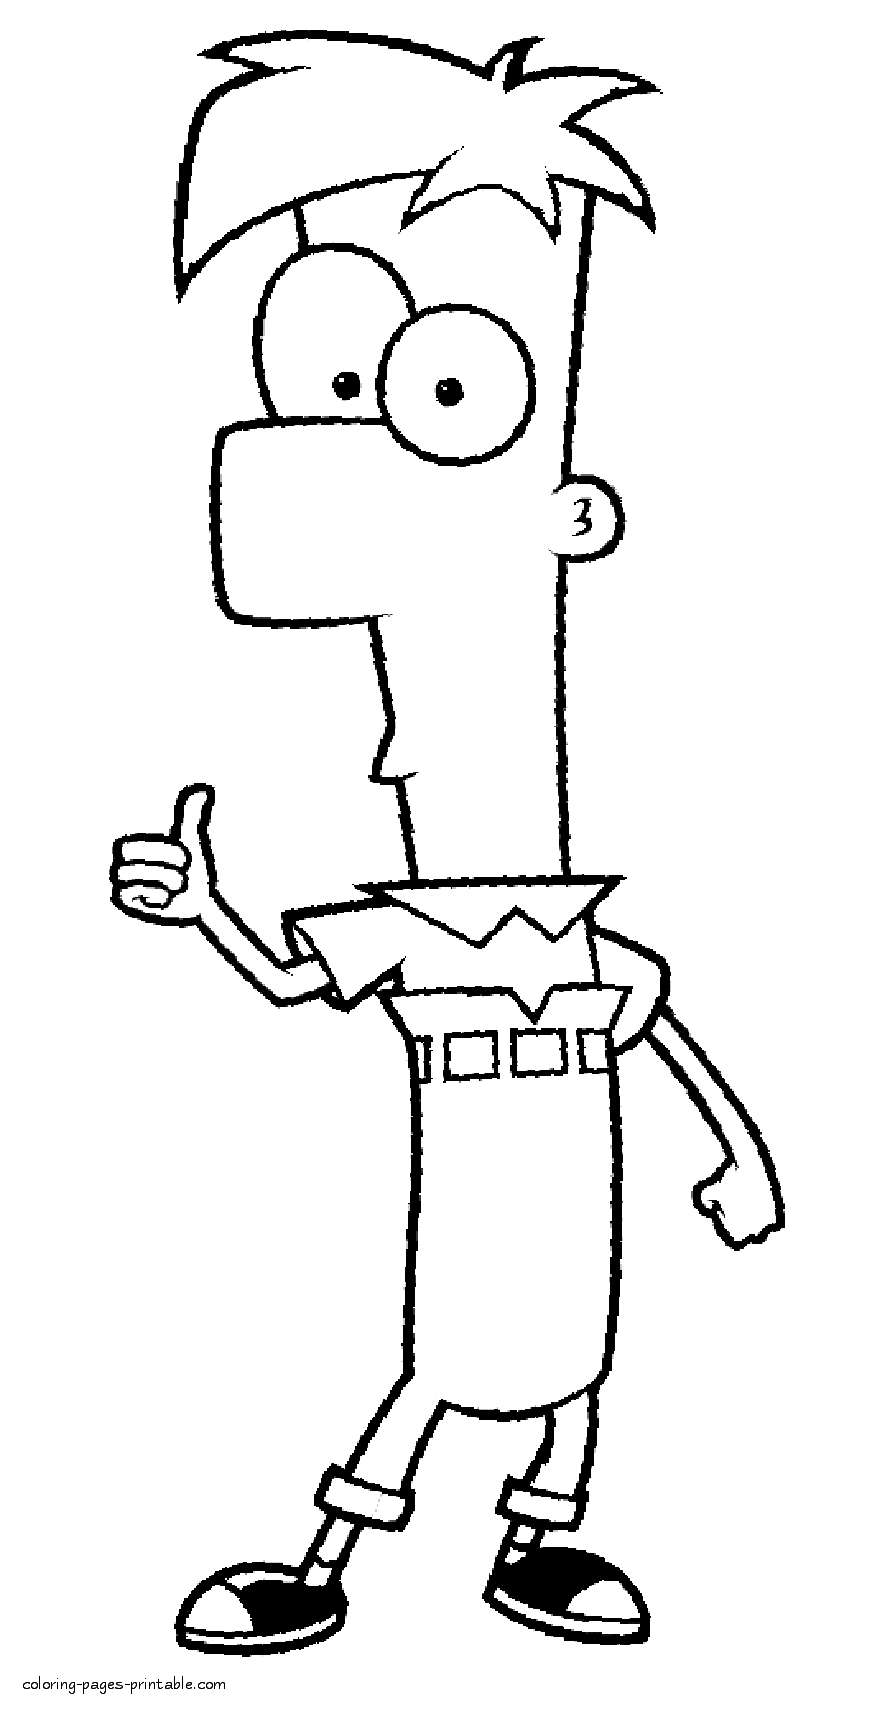 phineas-and-ferb-coloring-pages-coloring-pages-printable-com